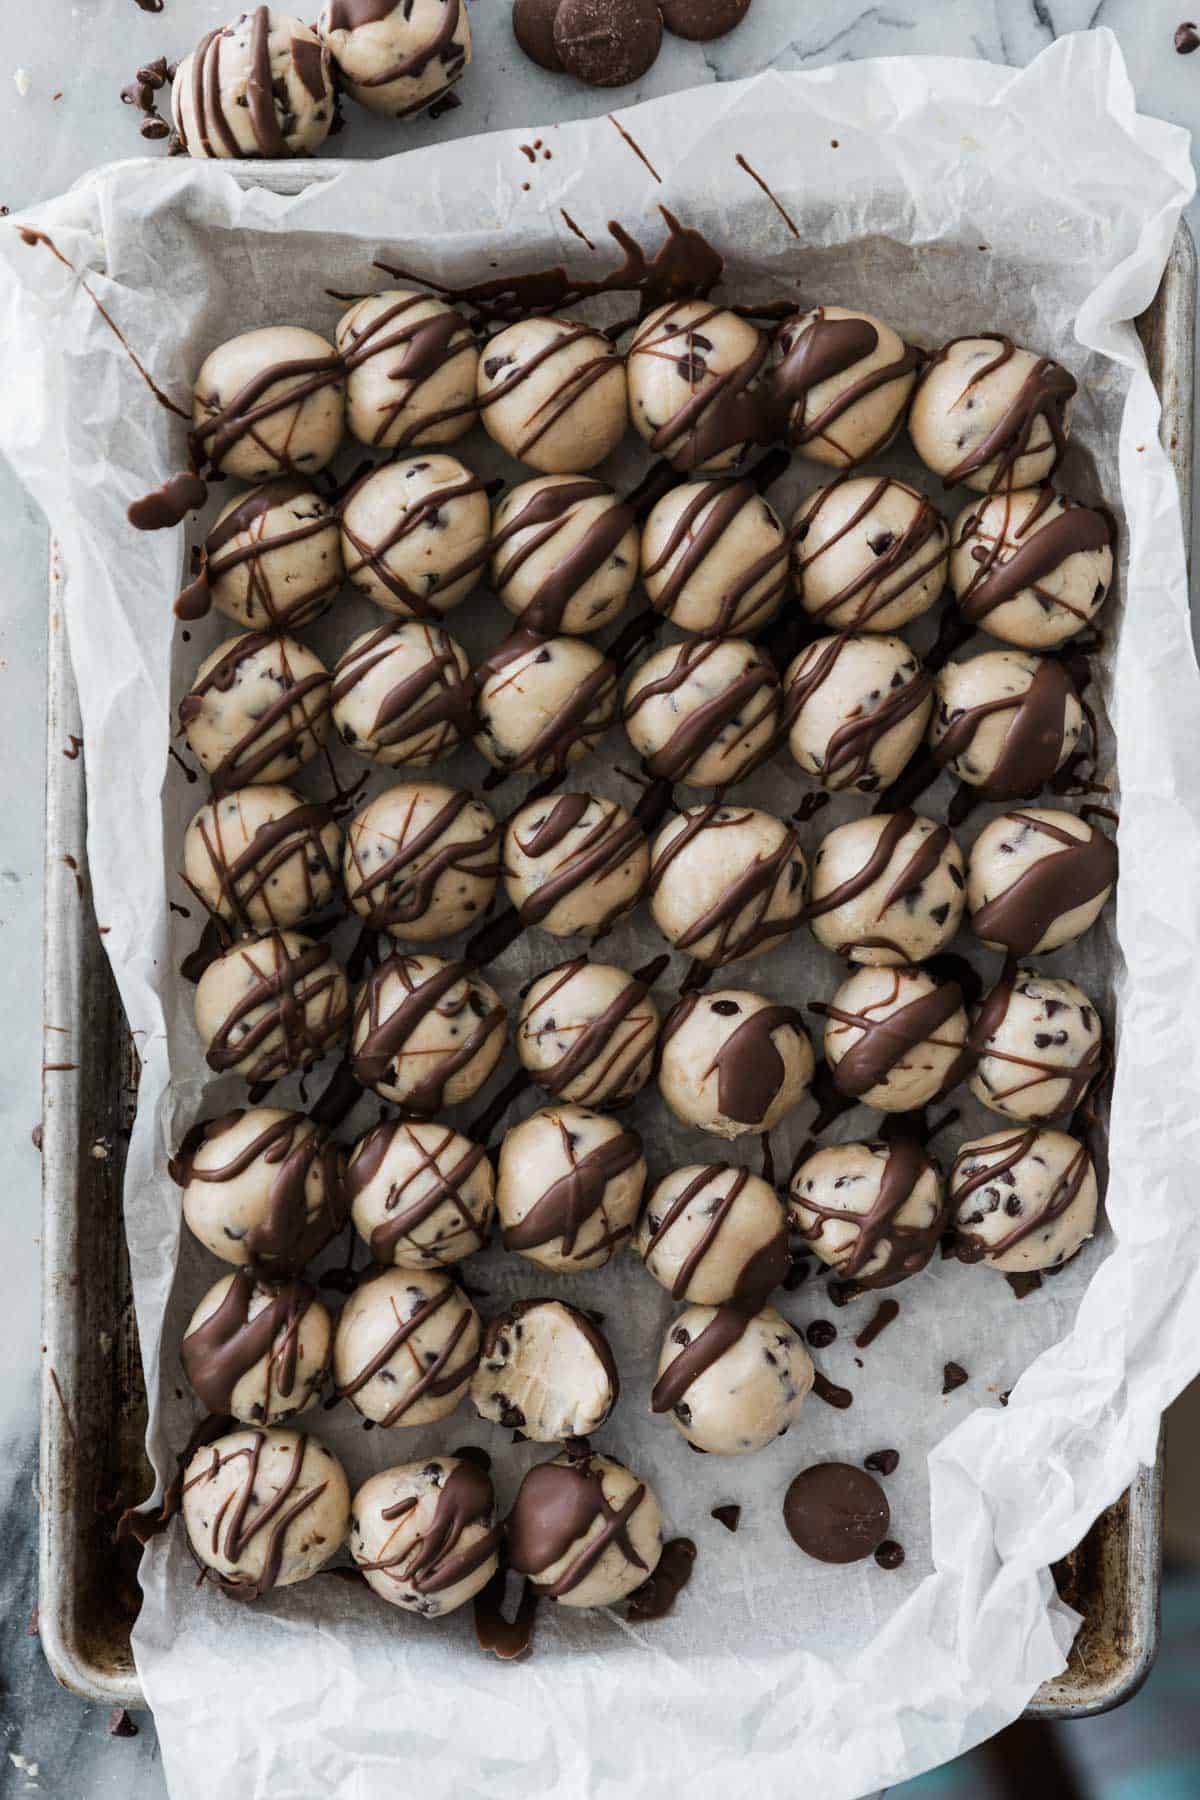 Tray of cookie dough balls with chocolate drizzled over. 